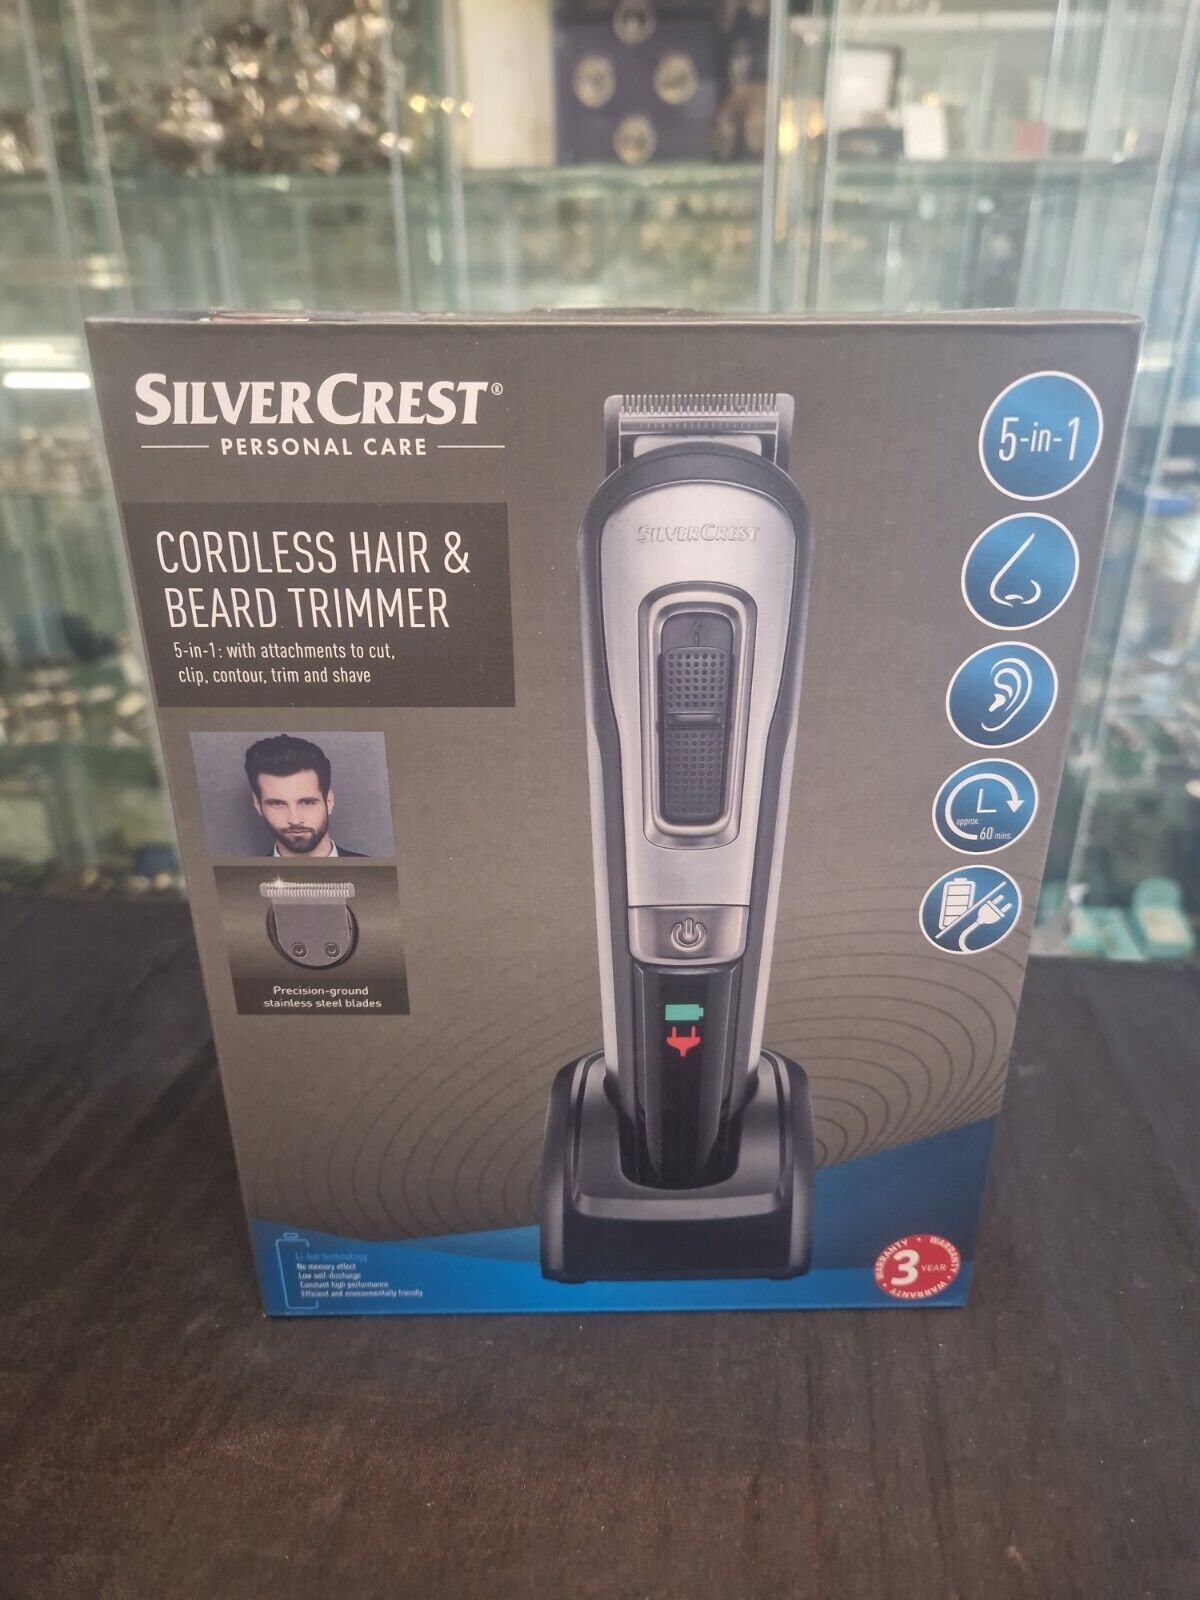 Silvercrest Cordless Hair and Beard Trimmer 5 in 1 Nose Ear Contour Trim  Shape